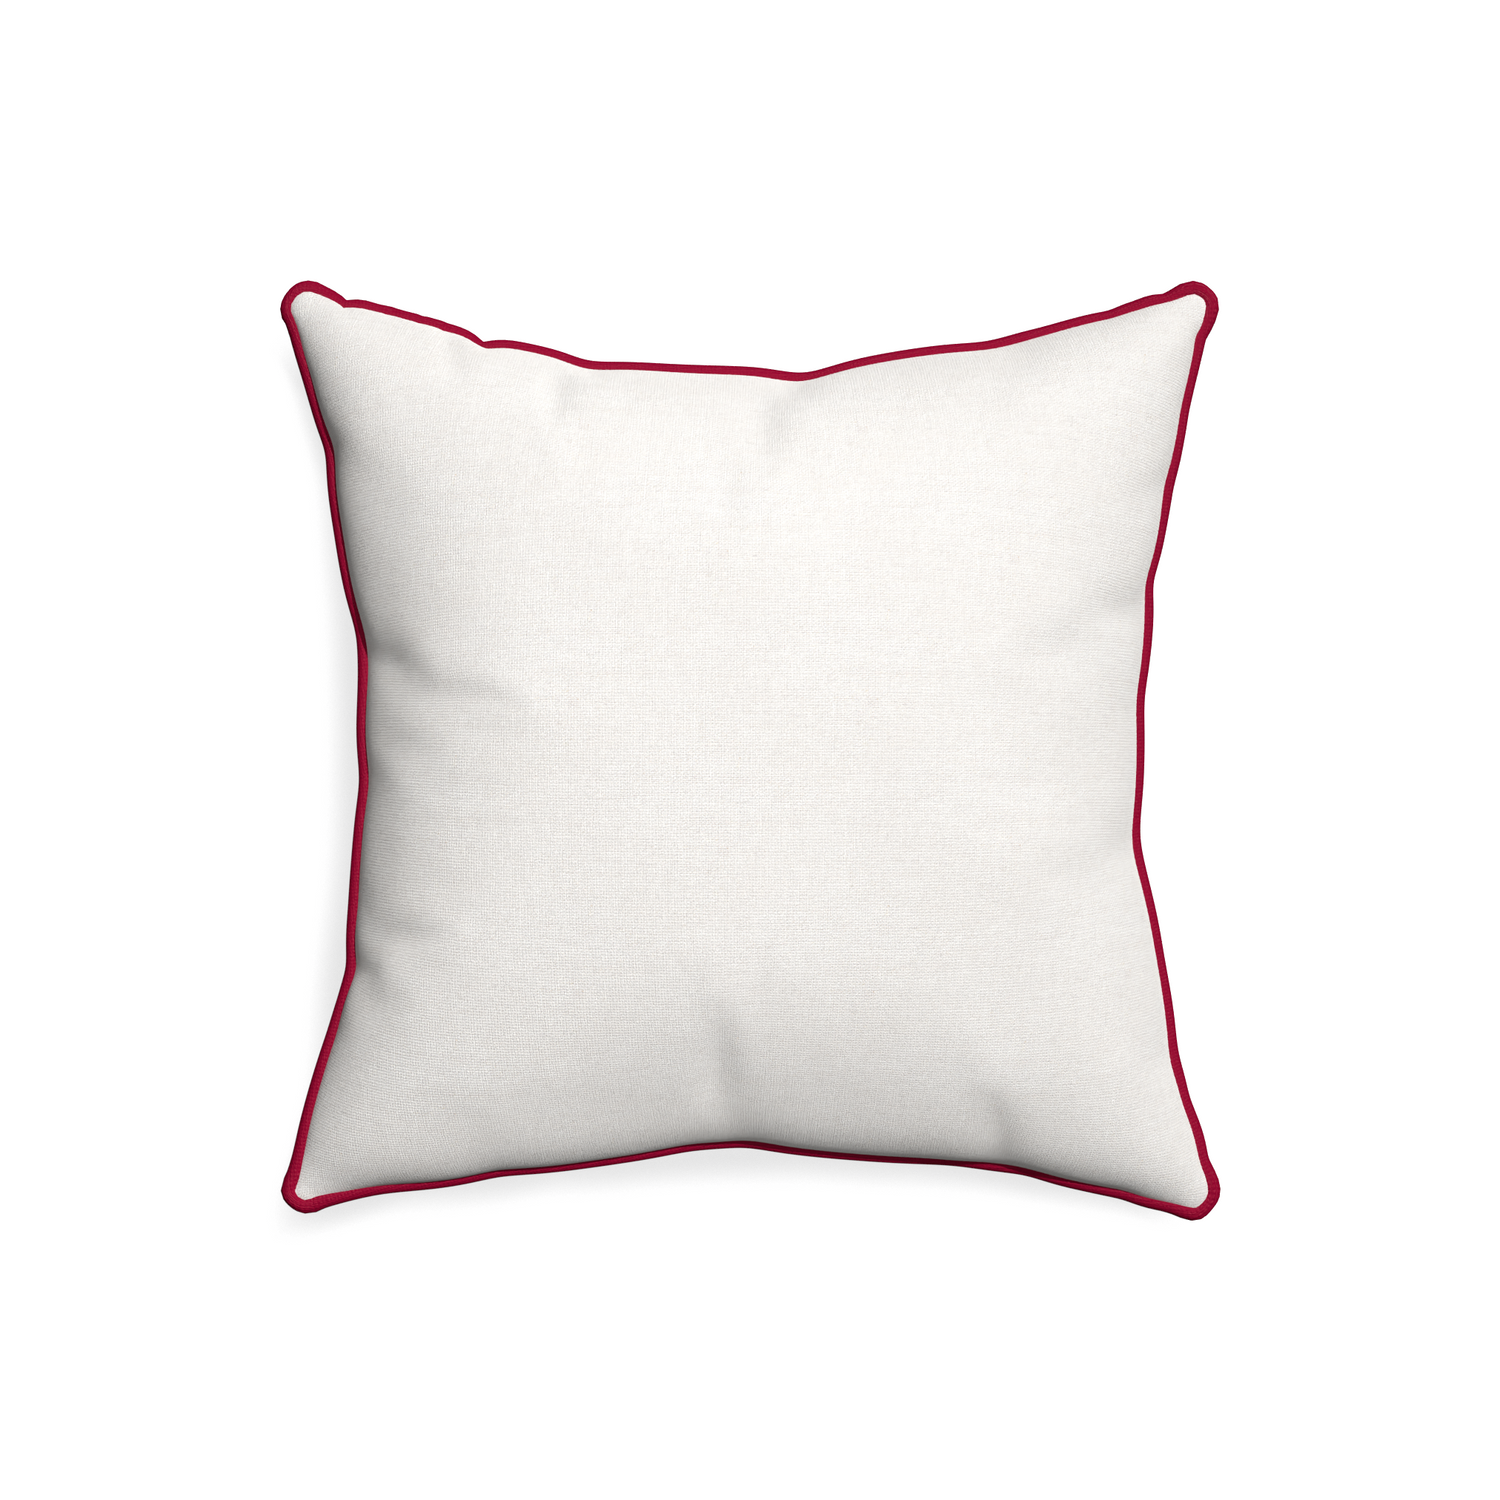 20-square flour custom pillow with raspberry piping on white background